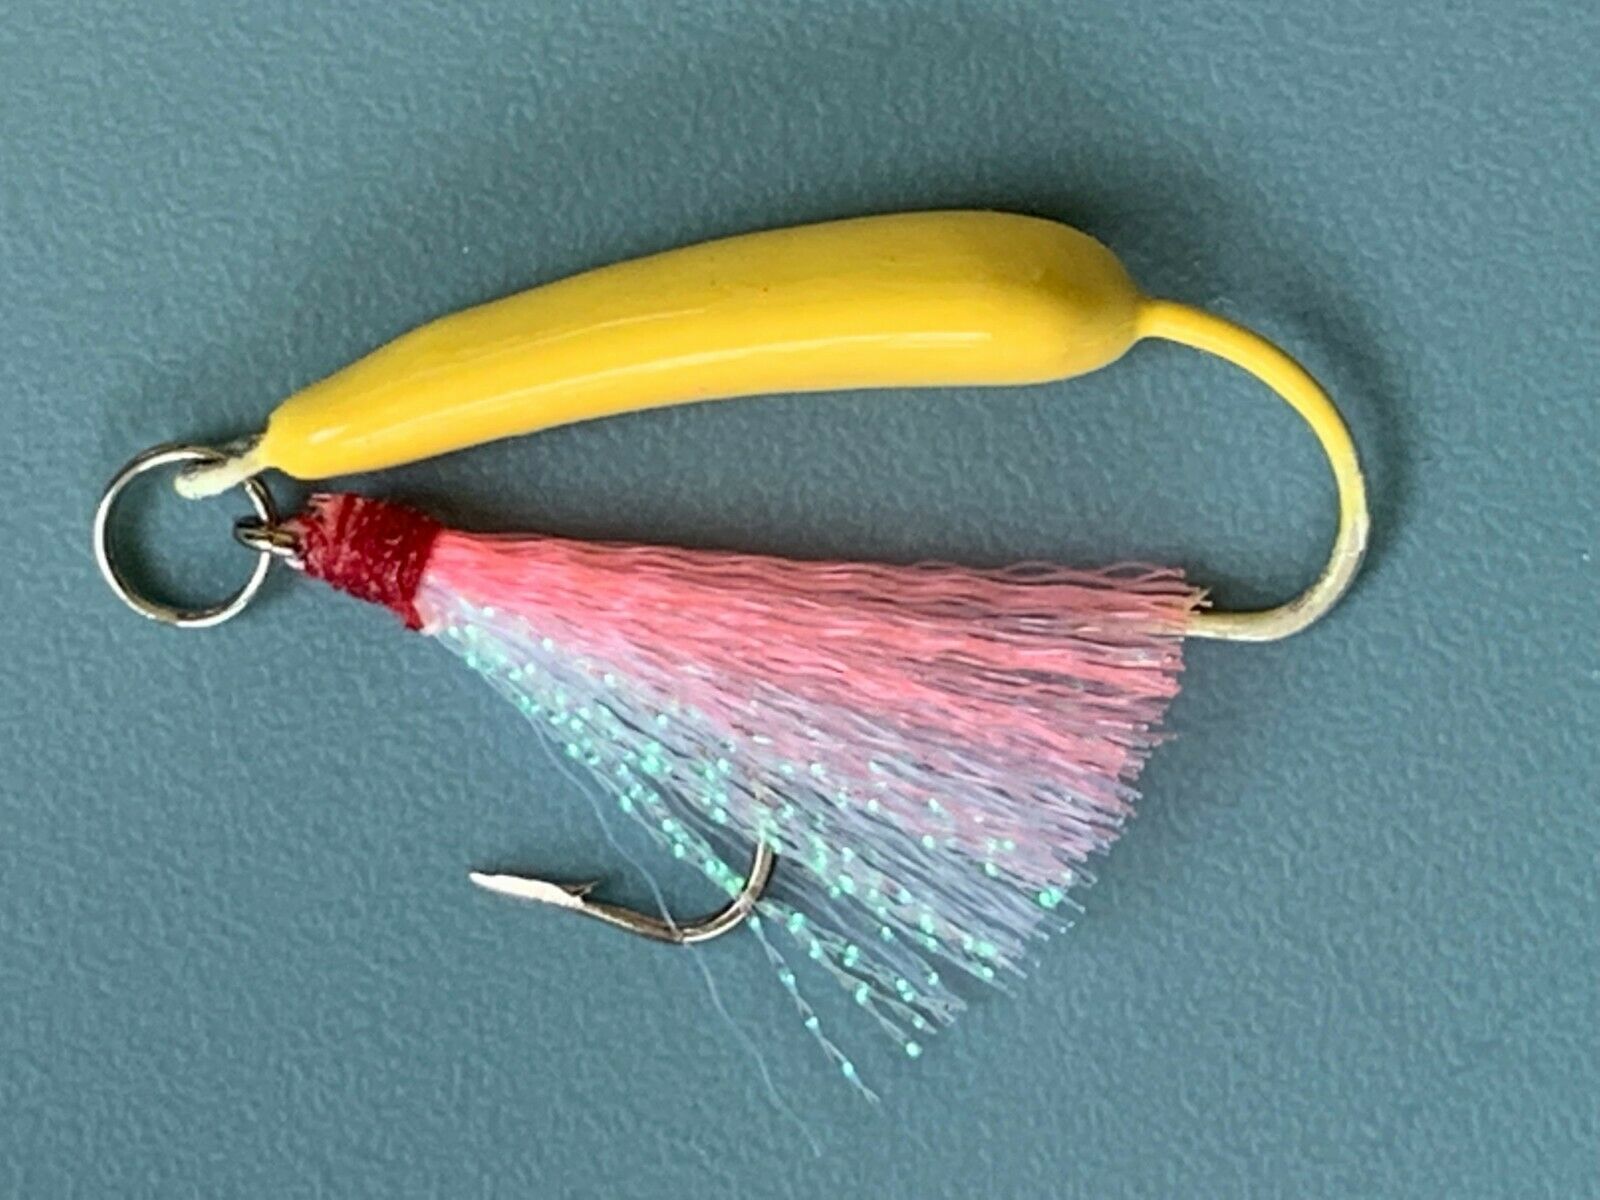 Ringed Pompano Jig B. Yellow/ White/Pink Teaser